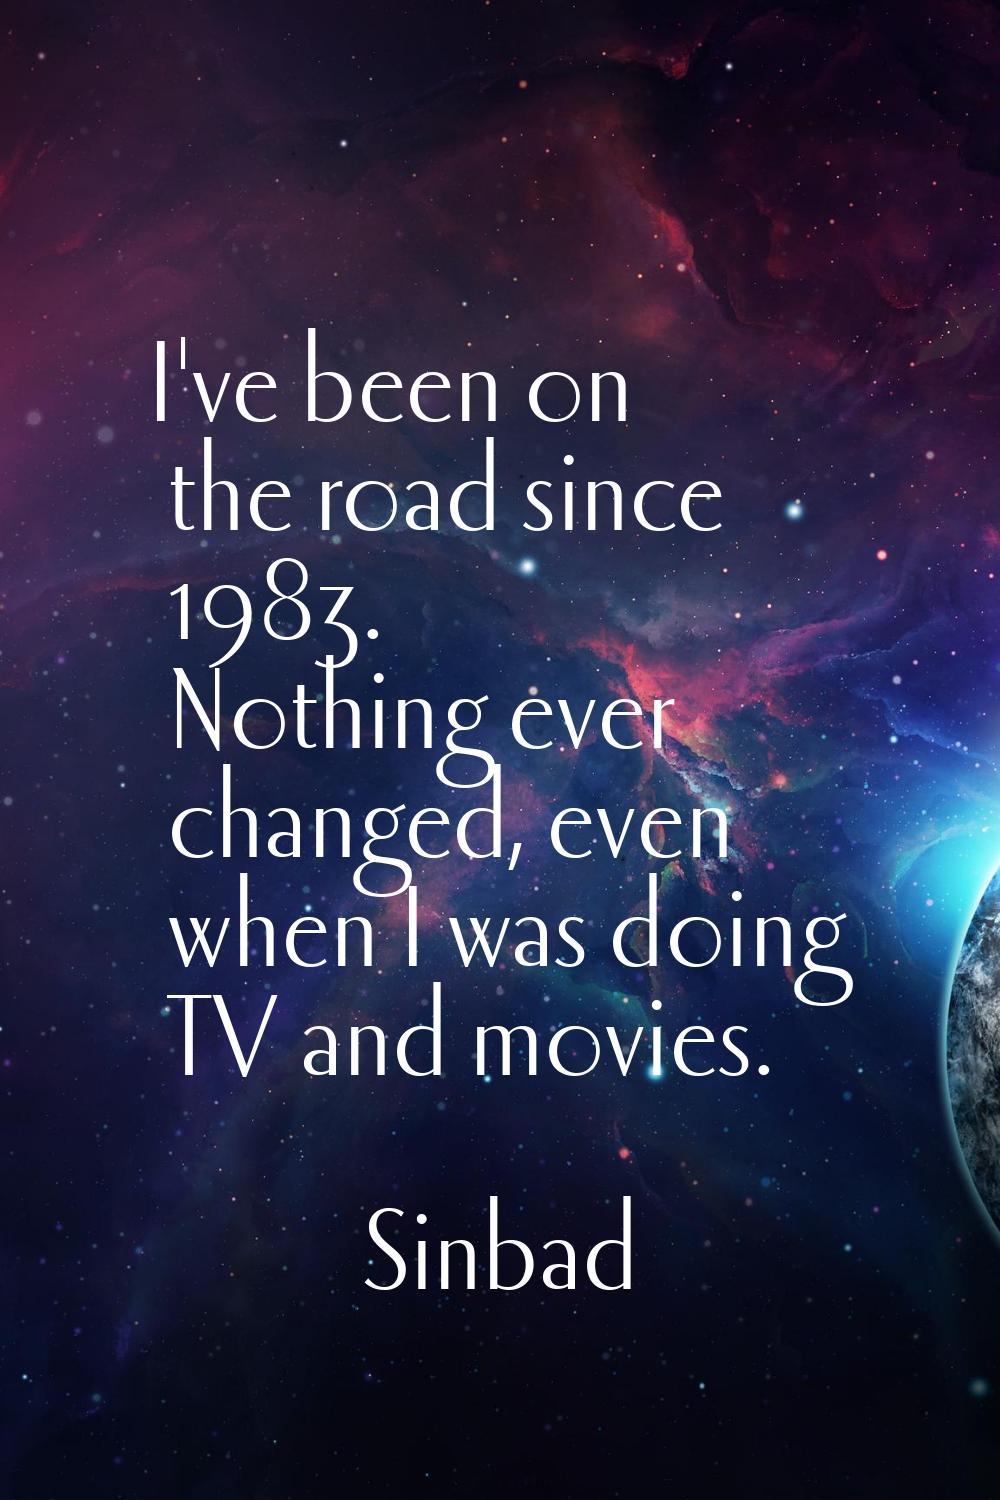 I've been on the road since 1983. Nothing ever changed, even when I was doing TV and movies.